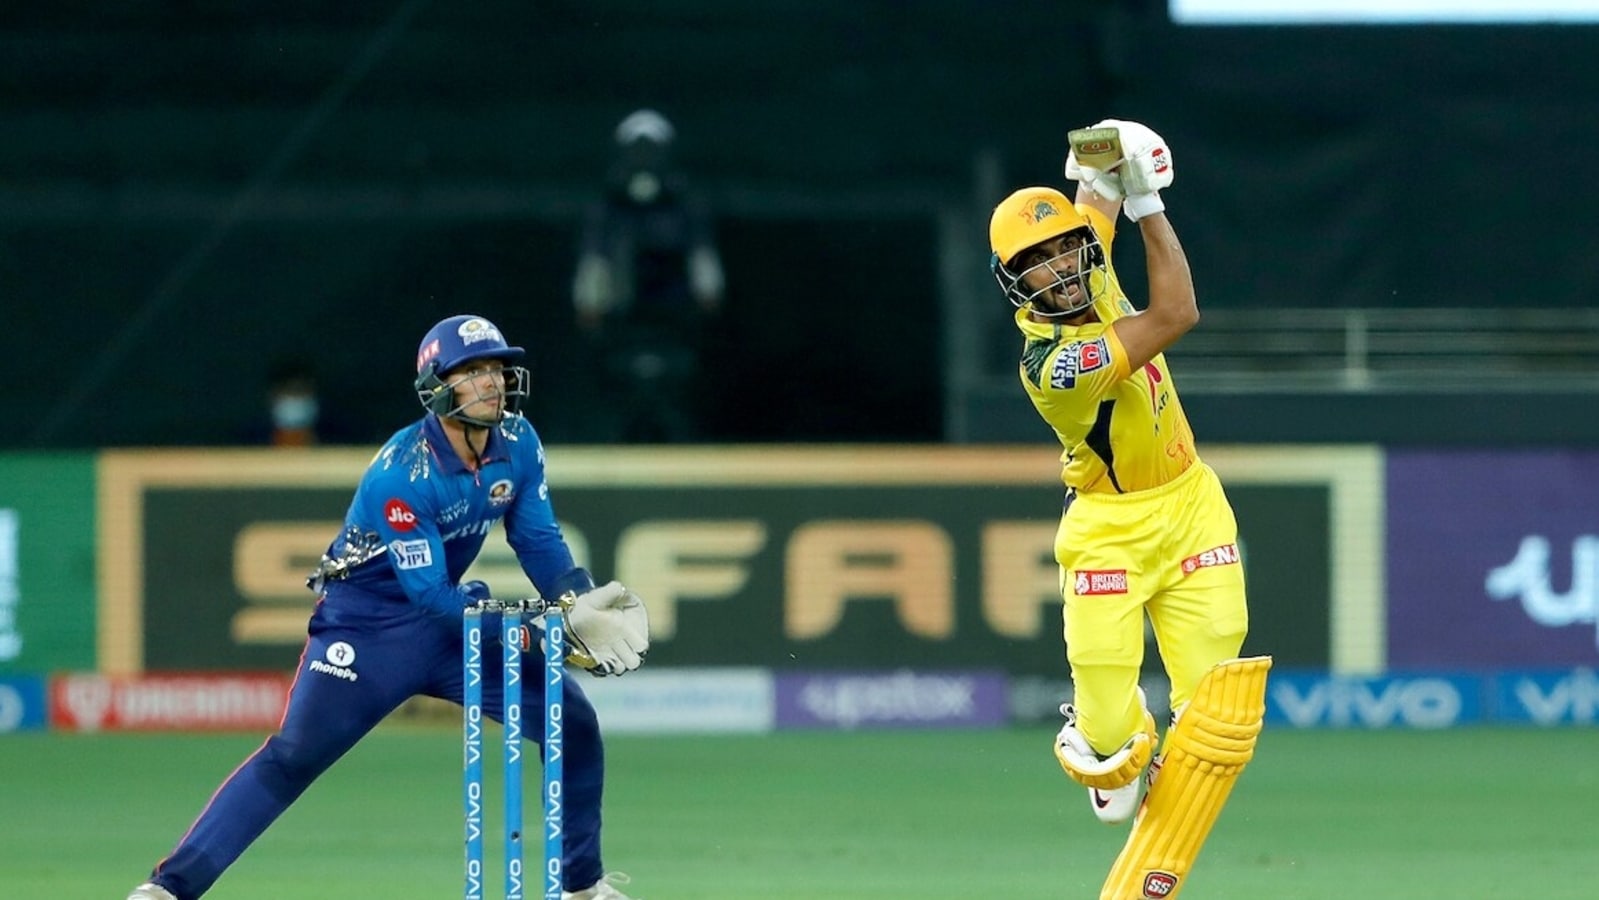 Dhoni loses his cool at Bravo after on-field confusion leads to a drop catch  – IPL News